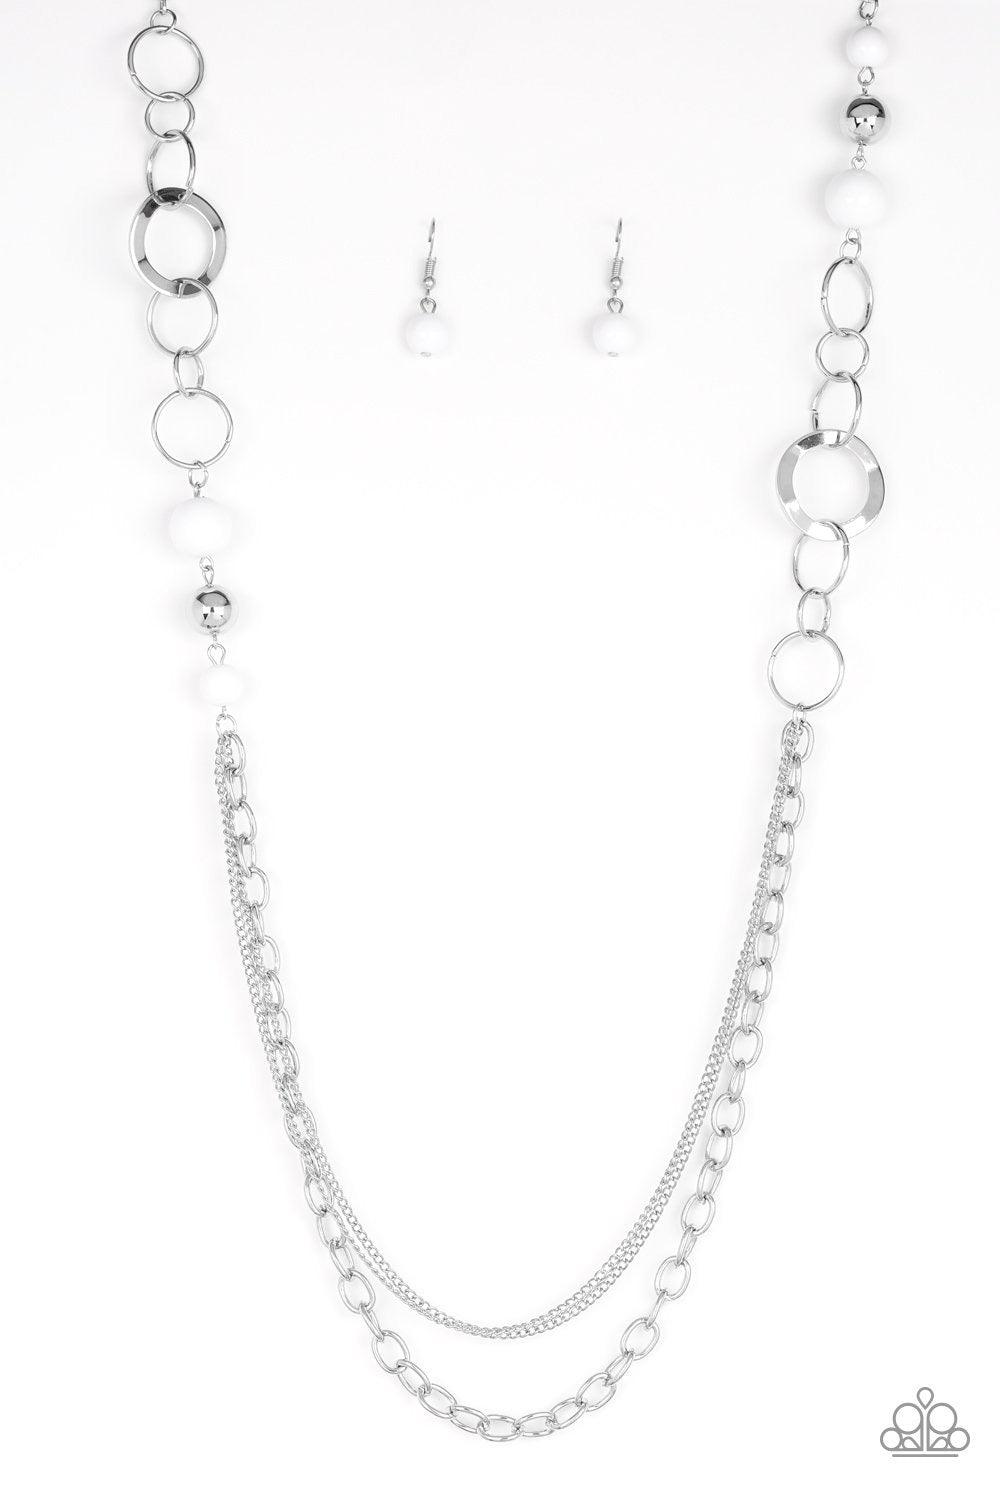 Paparazzi Accessories Modern Motley - White Refreshing white beads, shiny silver beads, and glistening silver hoops give way to mismatched silver chains for a whimsical look. Features an adjustable clasp closure. Sold as one individual necklace. Includes